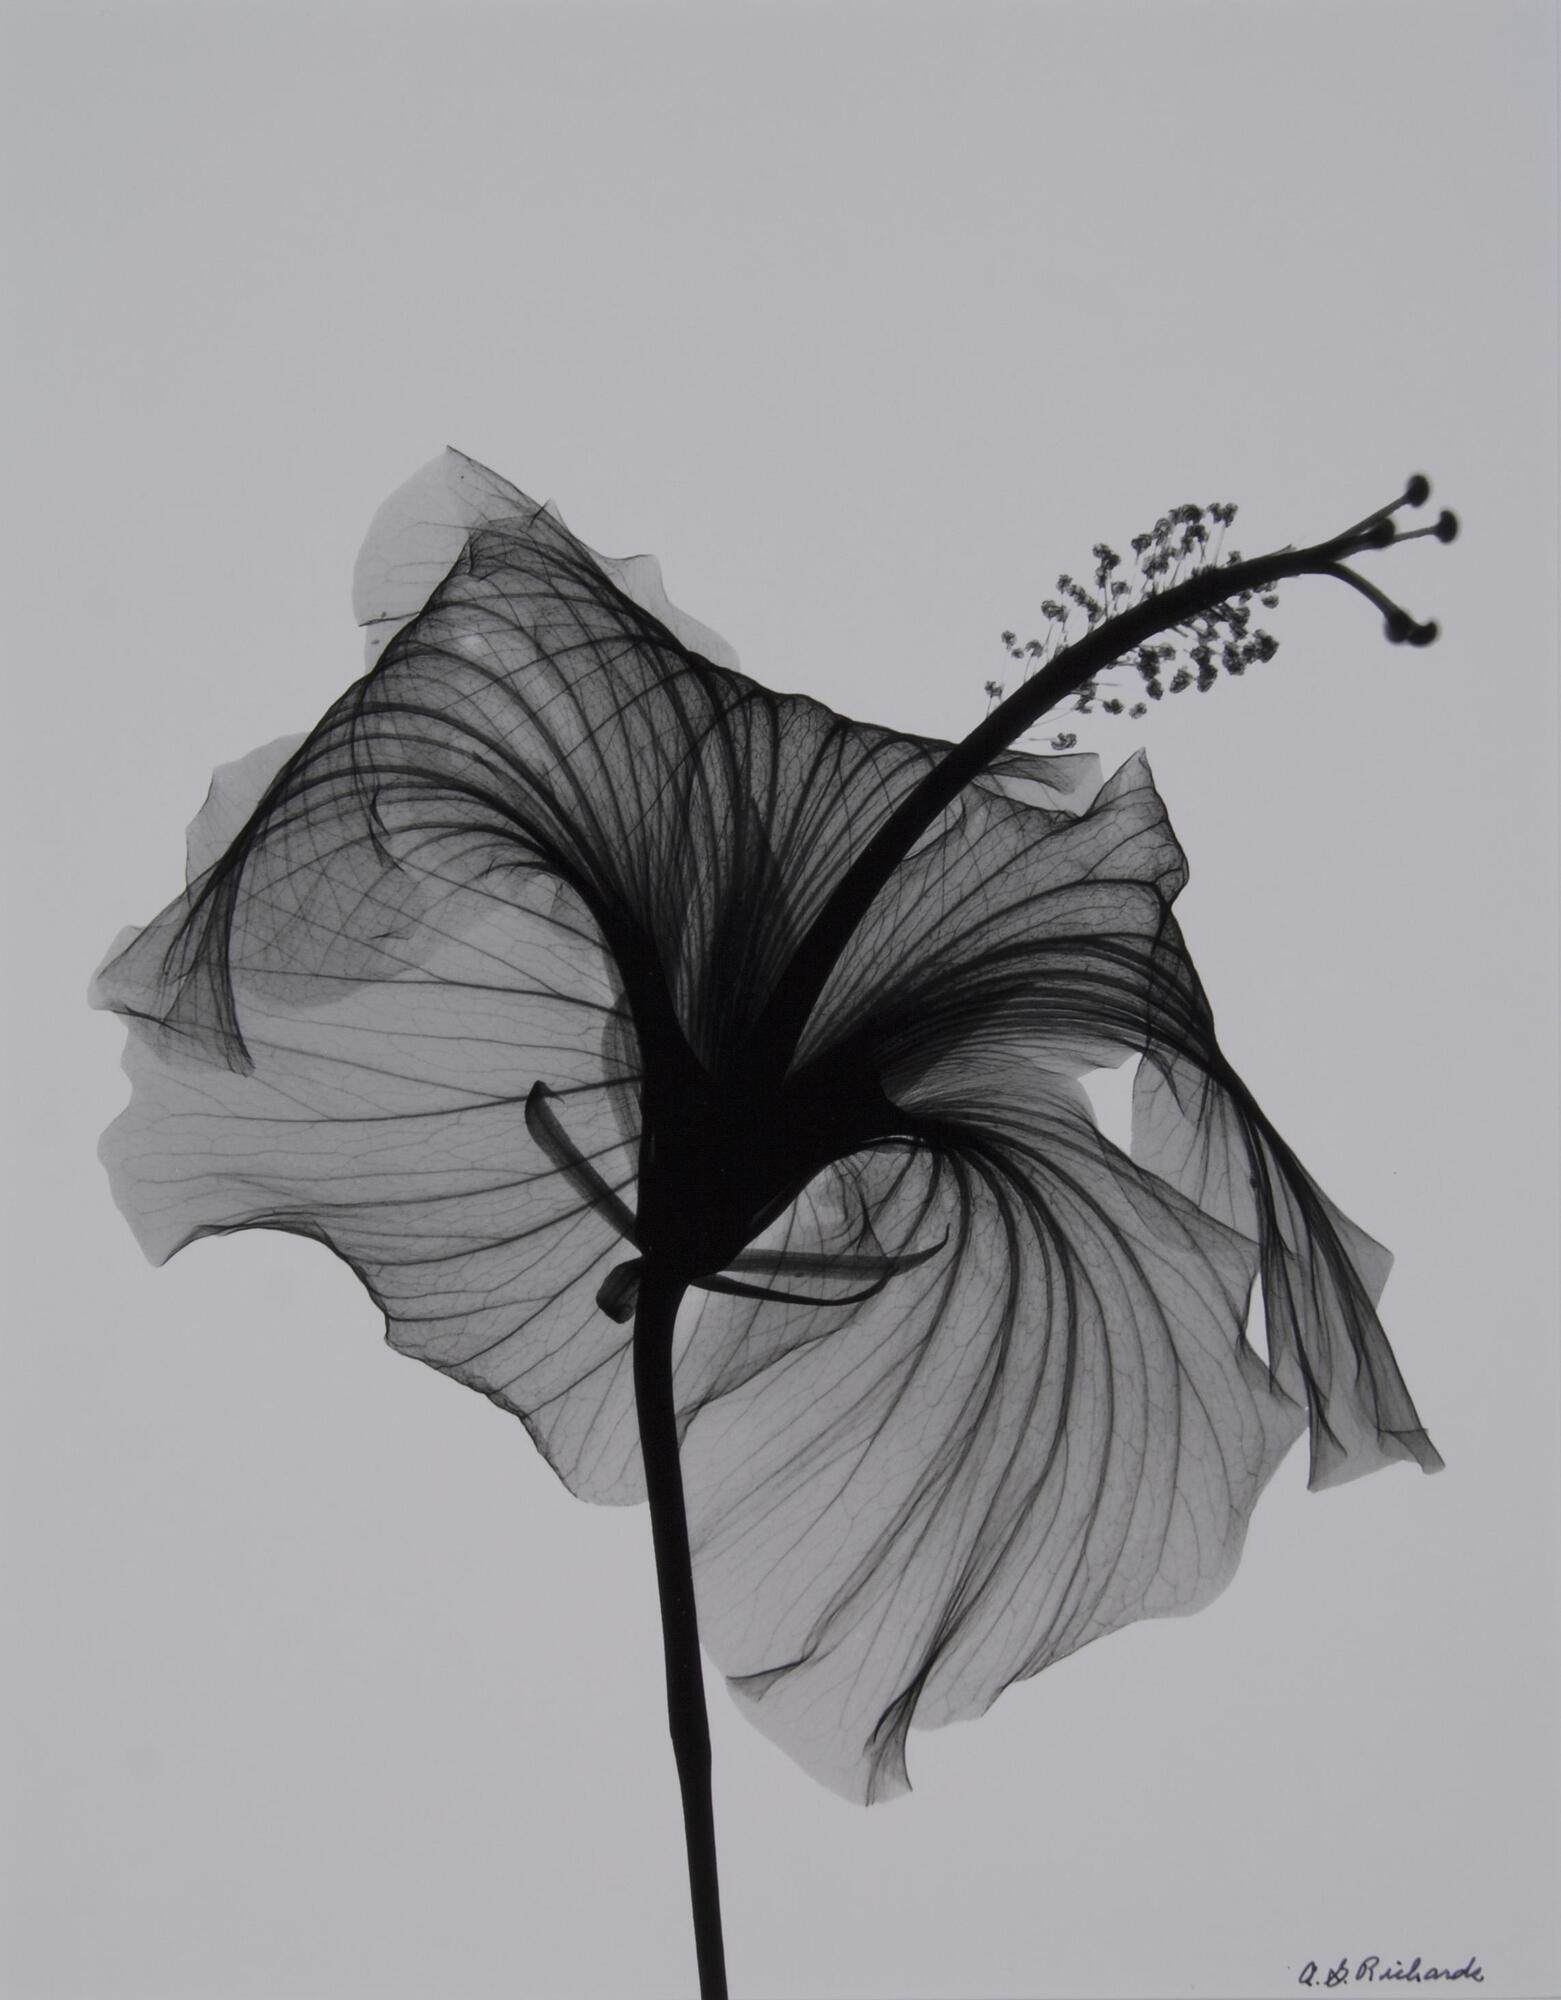 A single hibiscus flower and stem coming from the bottom to the center of the image, light grey background.